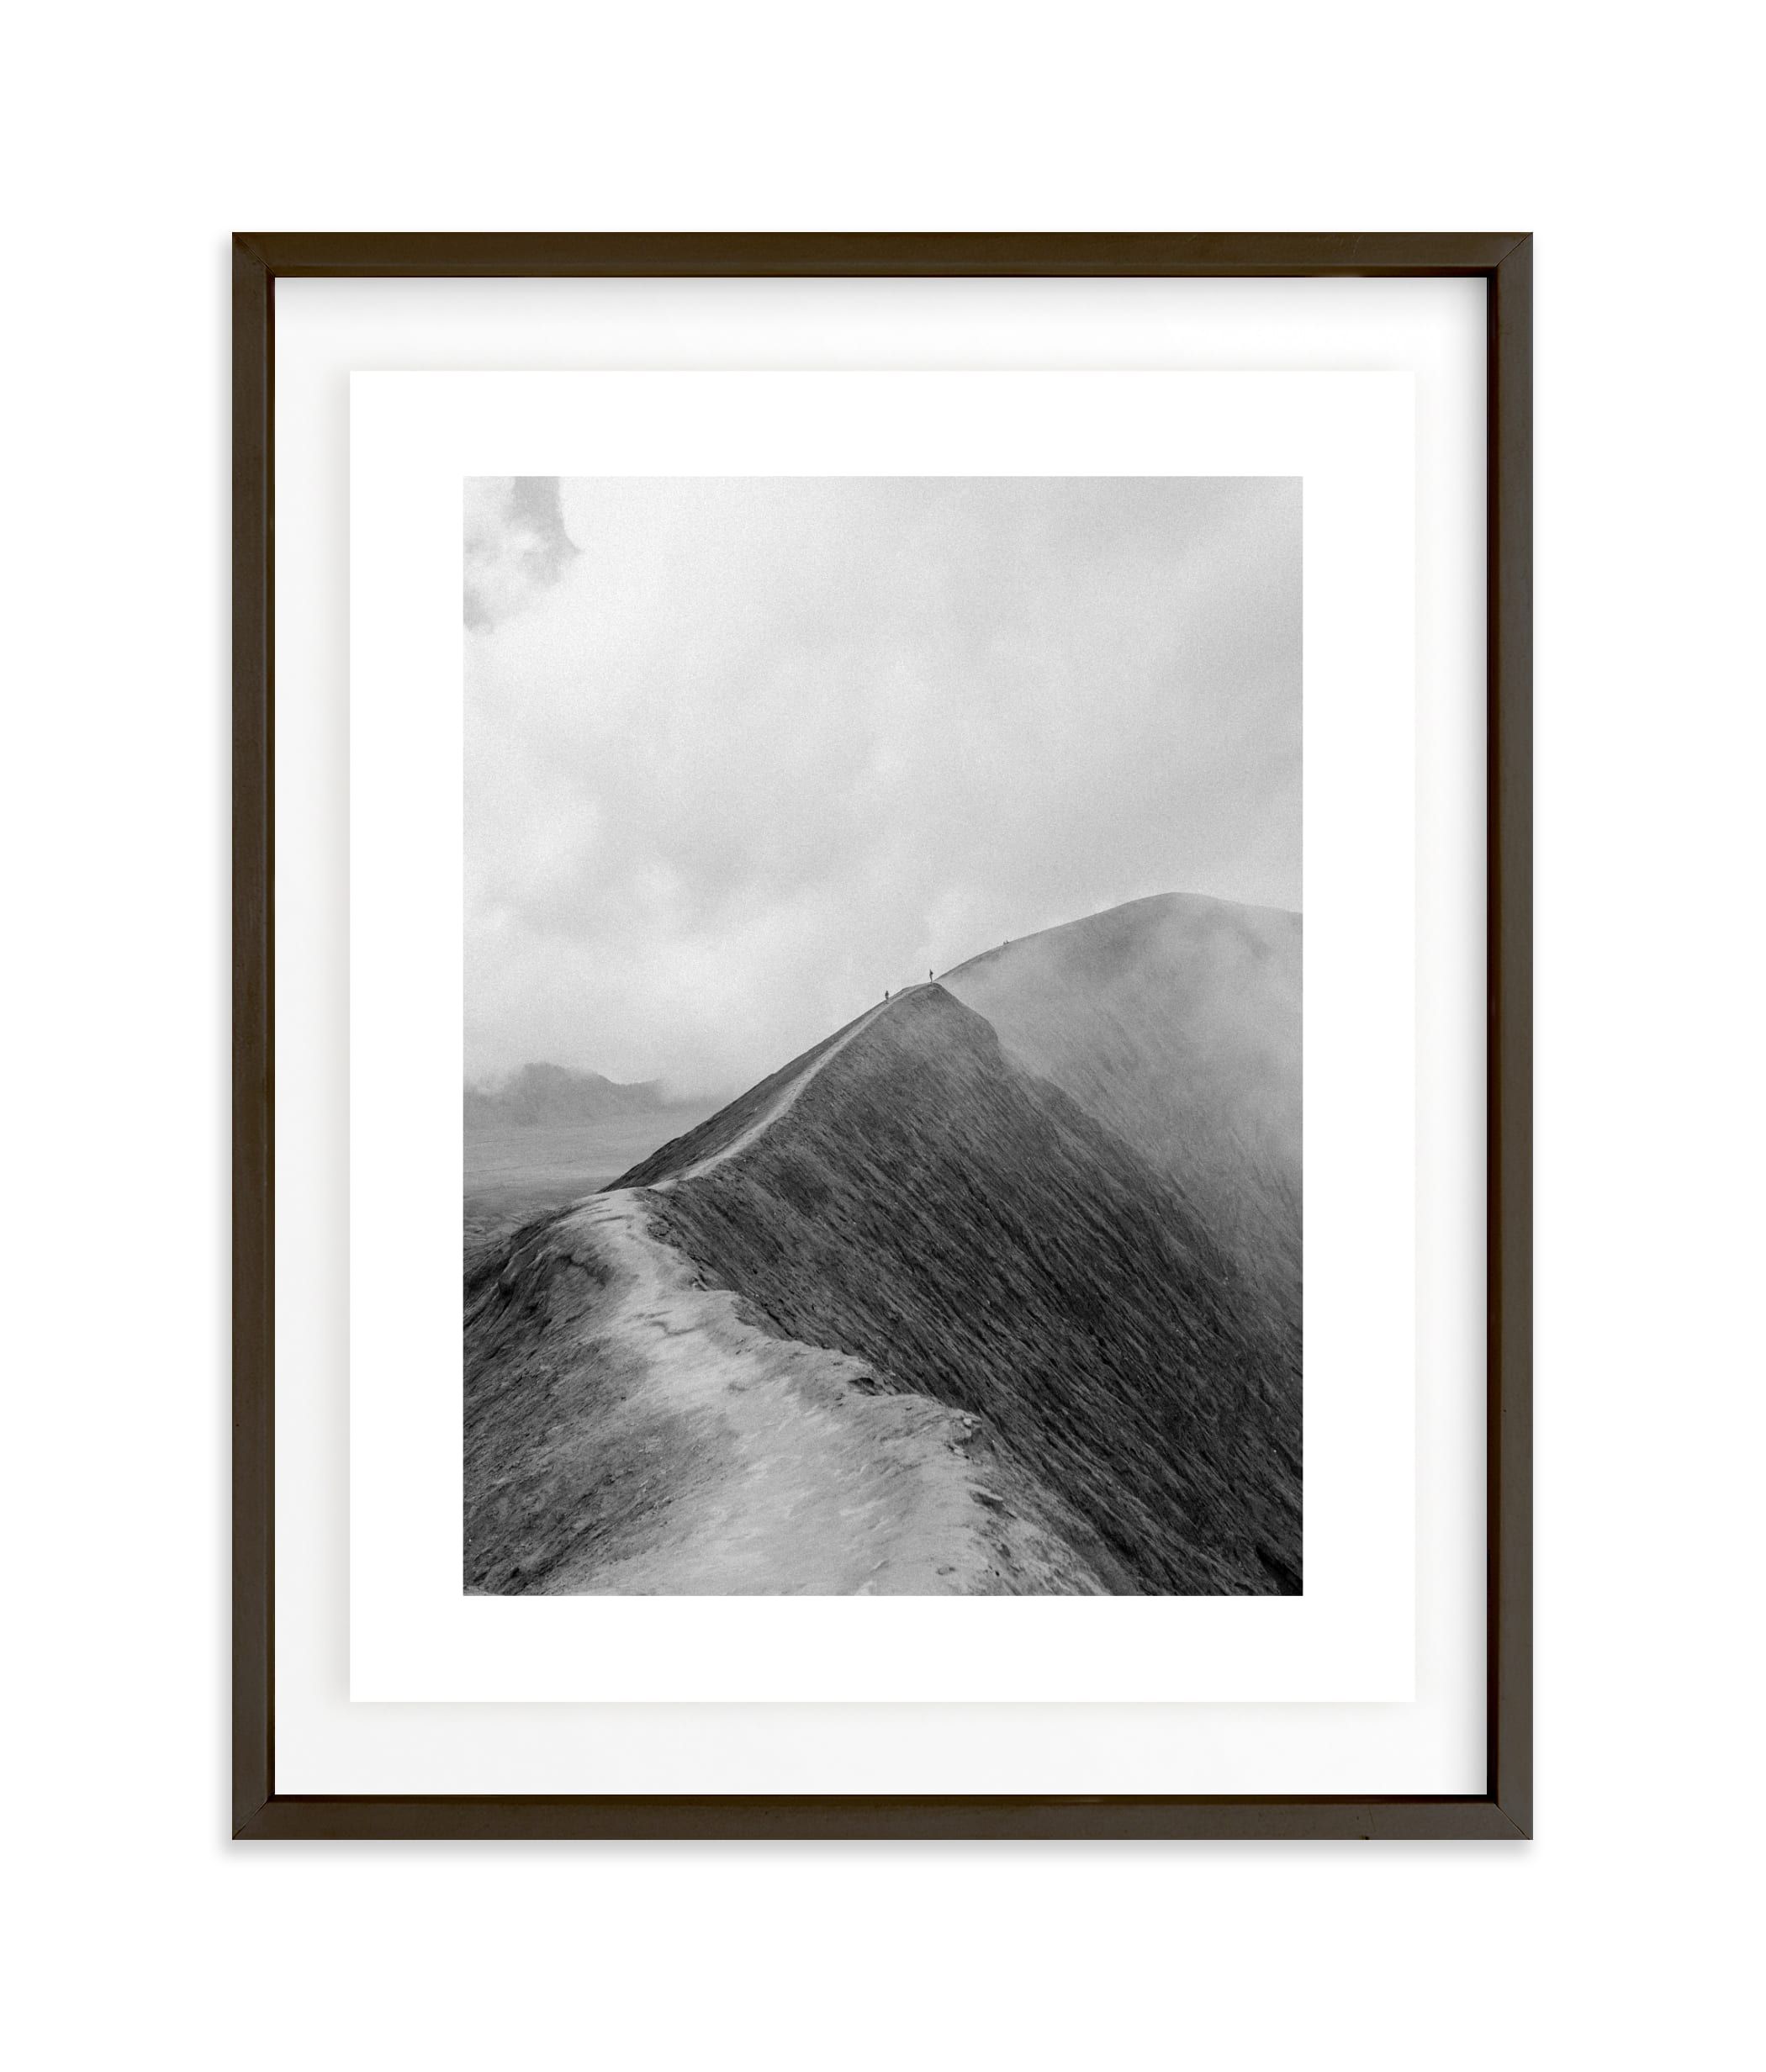 "Mighty Mount Bromo" - Photography Limited Edition Art Print by Marianne Brouwer. | Minted